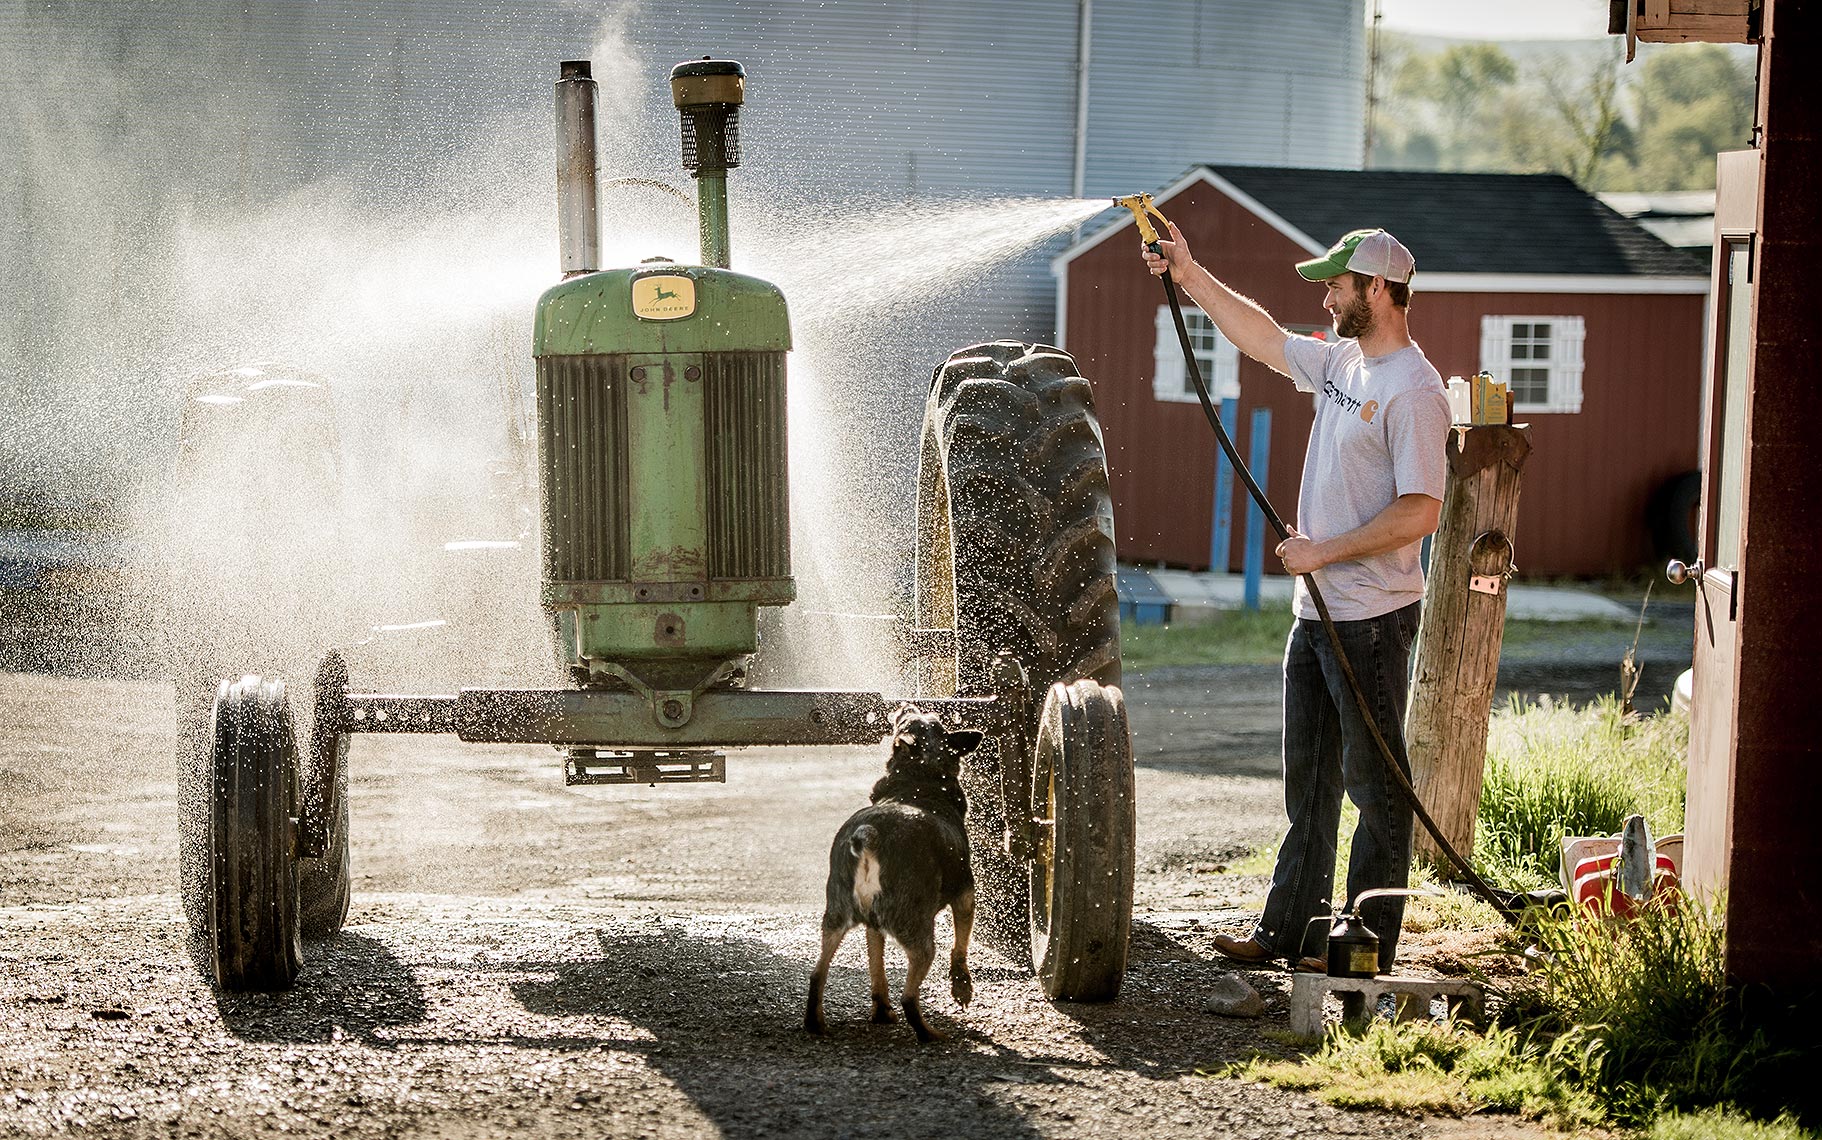 Washing Tractor on the Farm